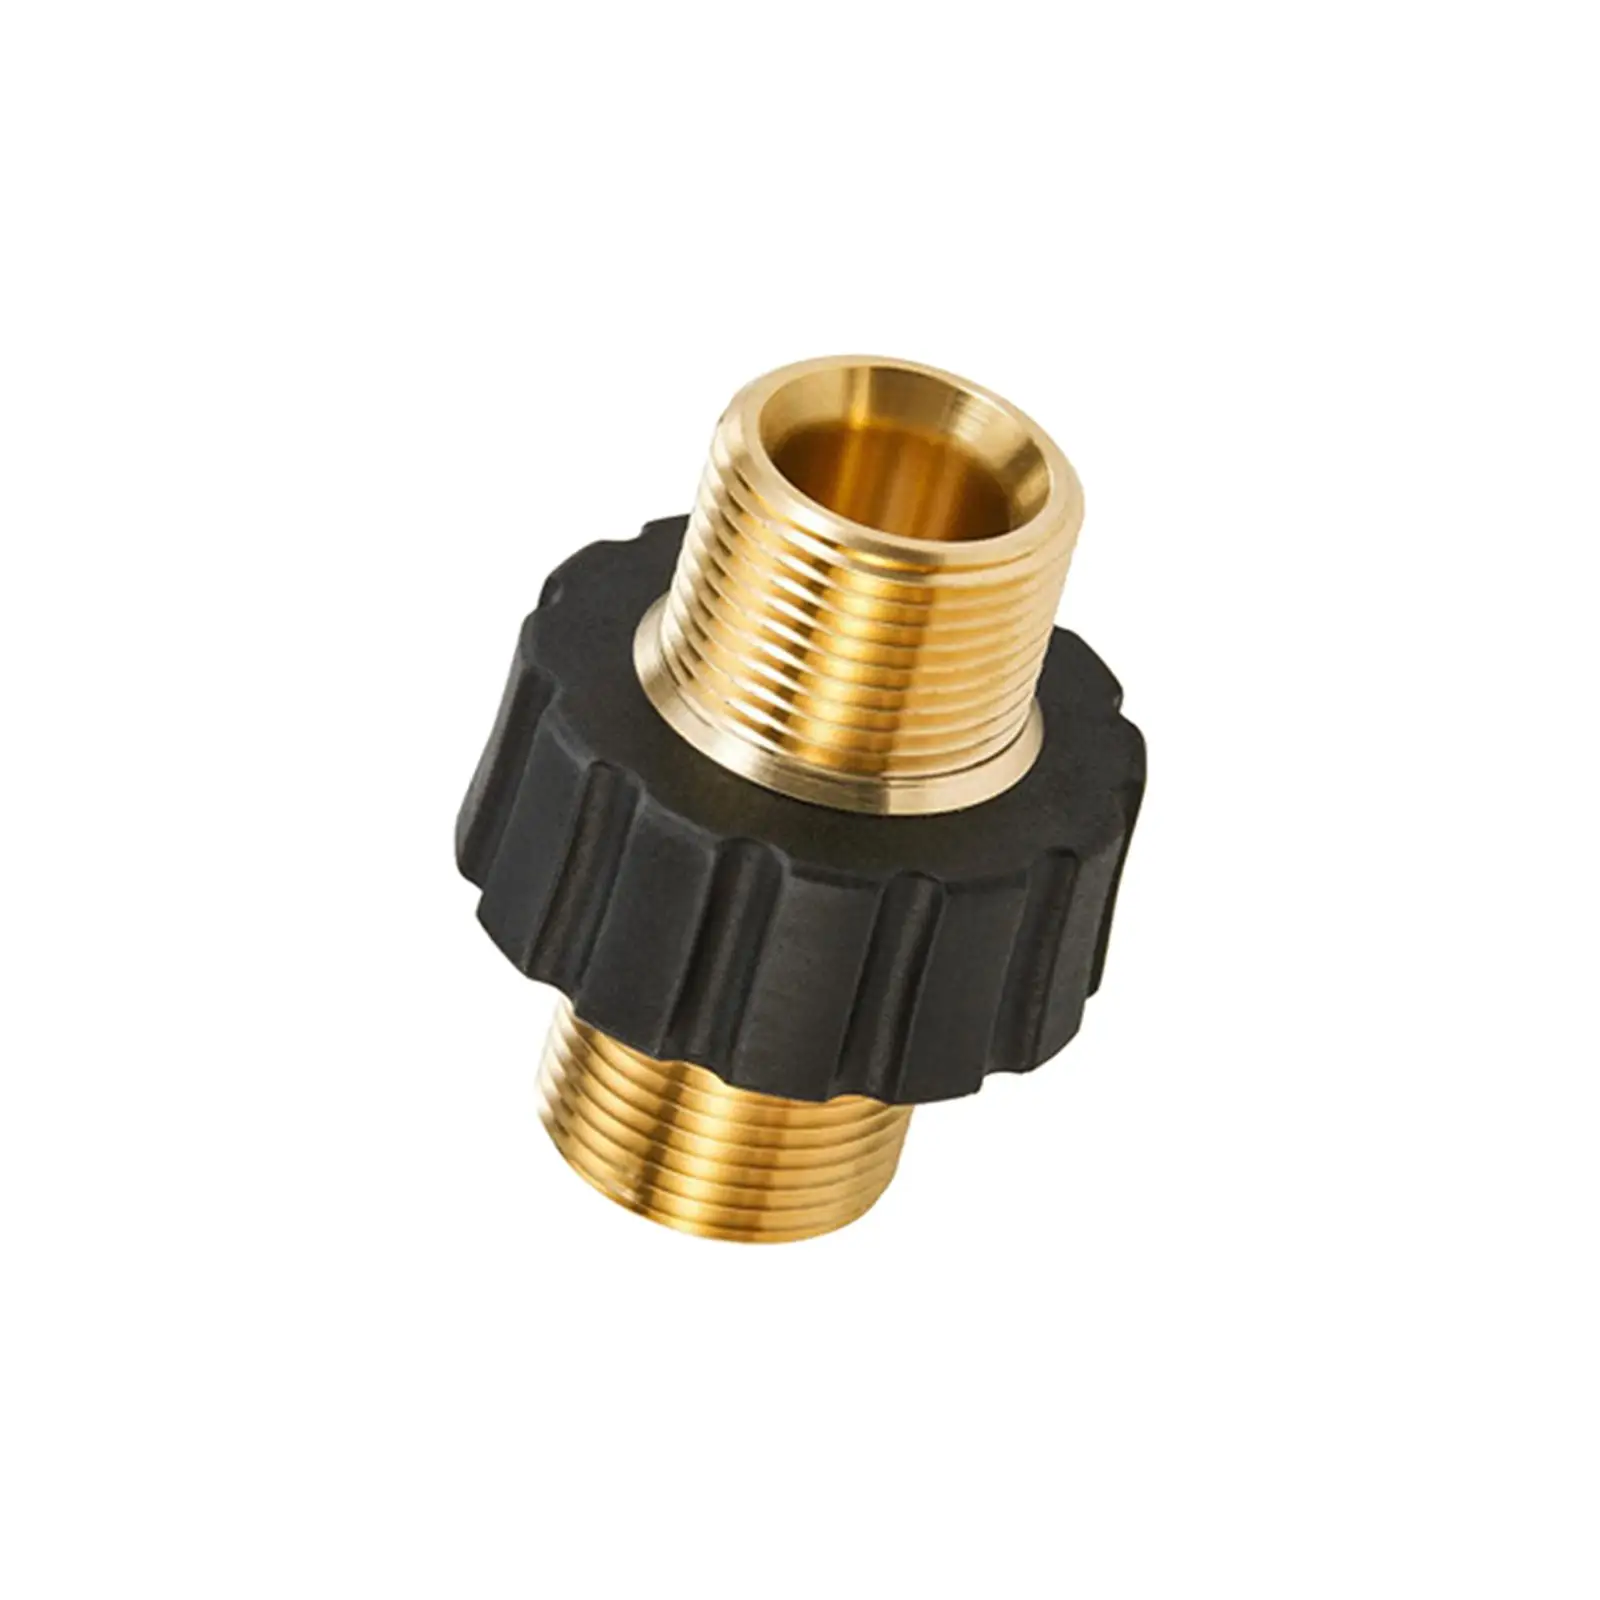 M22 14mm Male Brass High Pressure Washer Coupler Adapter, Garden Pipe Hose Parts 5000 PSI for Gardening